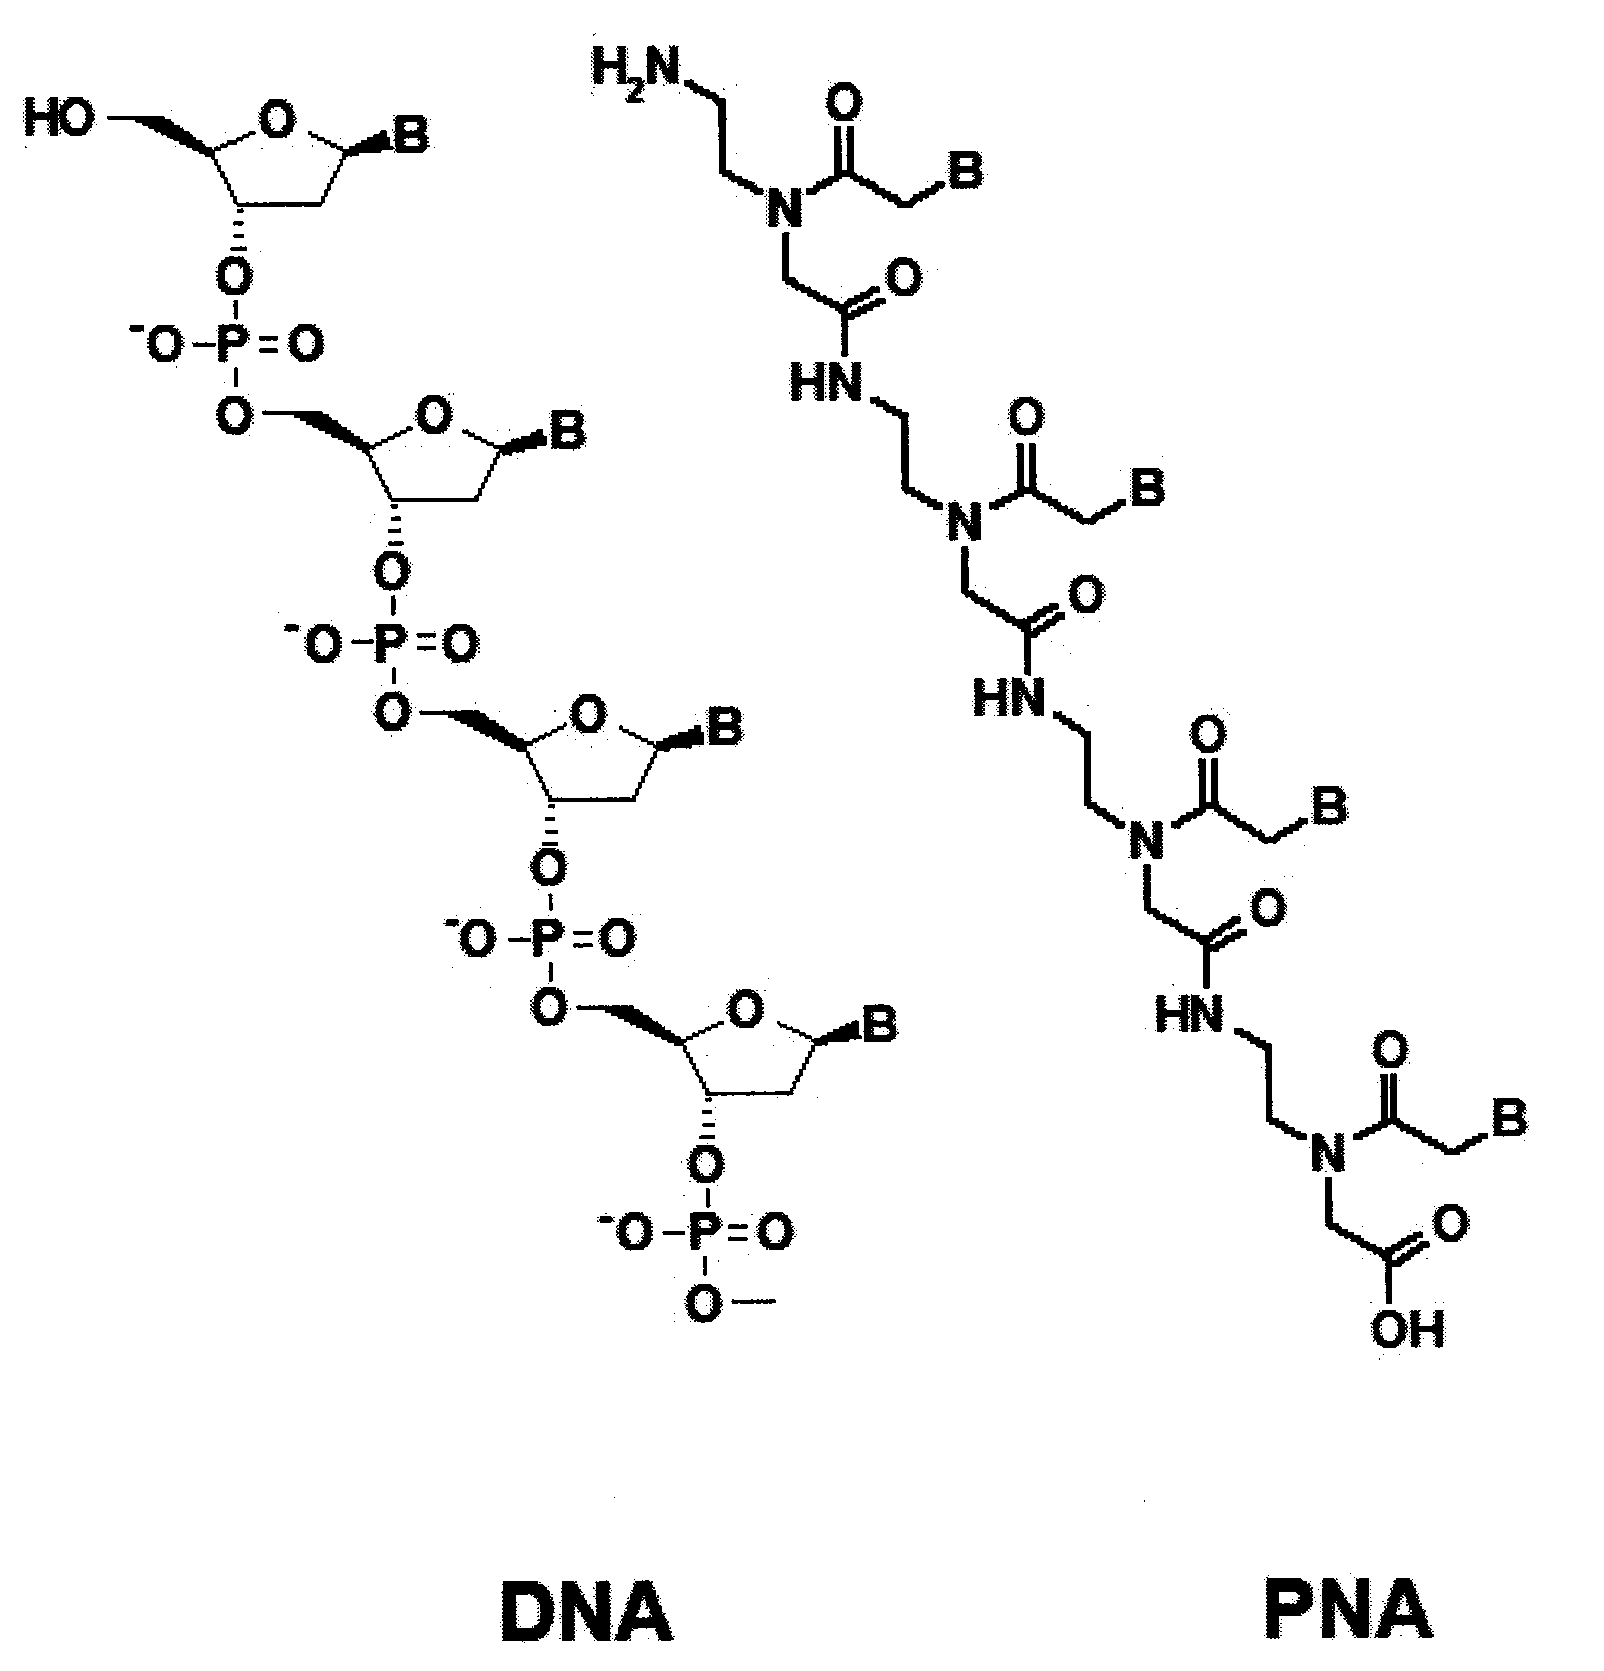 Method for Selective Labeling and Detection of Target Nucleic Acids Using Immobilized Peptide Nucleic Acid Probes